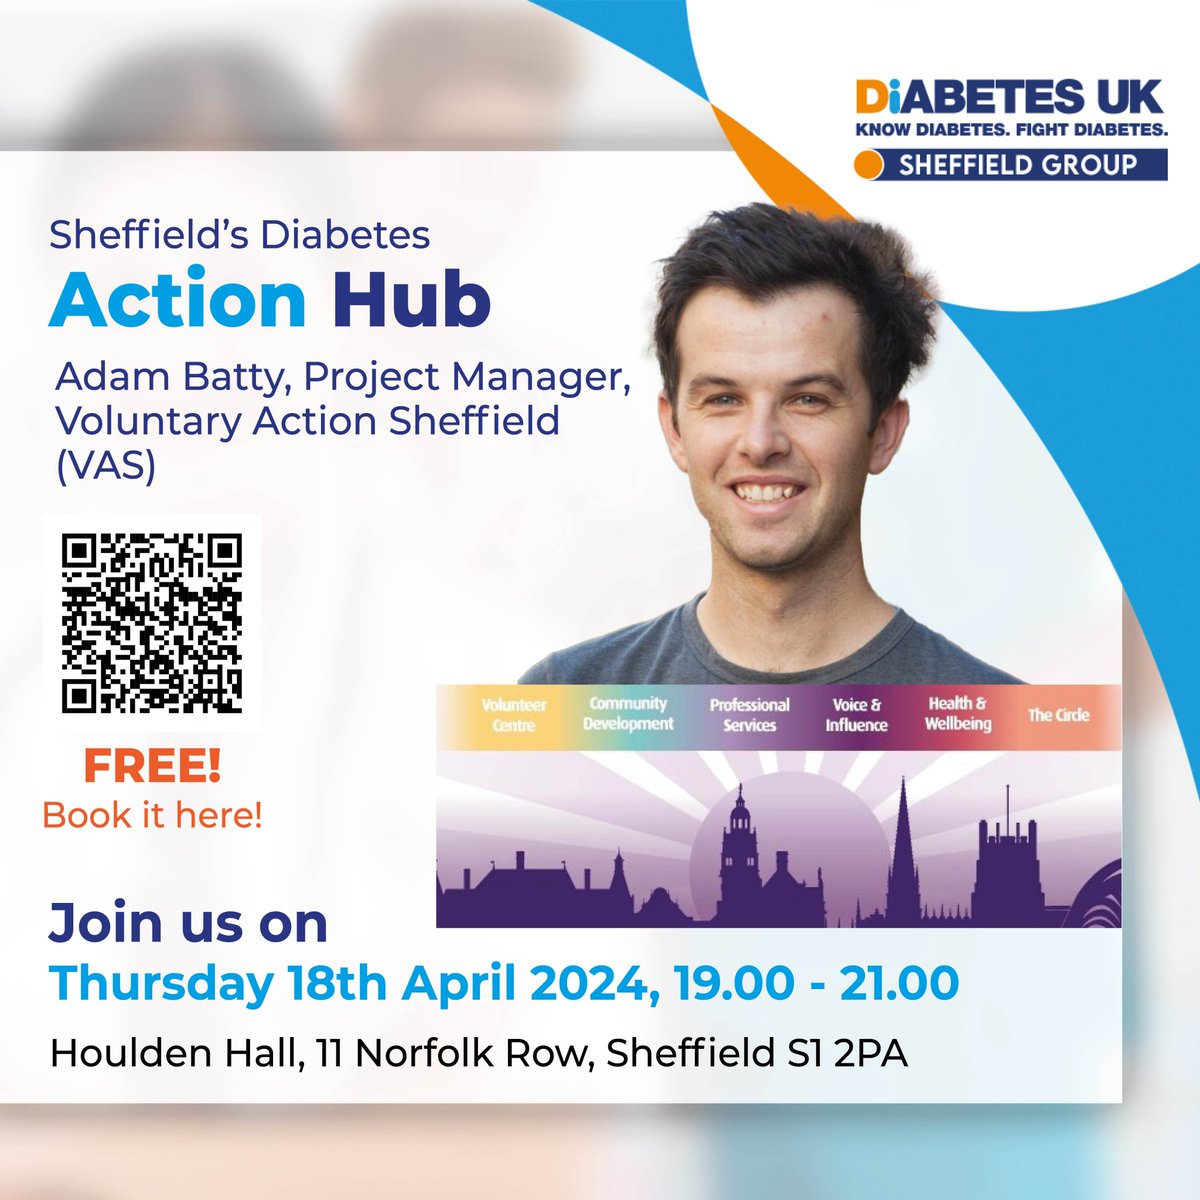 #Diabetes #Sheffield - what the Hub! What's #SheffieldActionHub? Why's it about #Diabetes? What's it for? Who's involved? Join Adam Batty @vasnews on Thursday - details: bit.ly/Sheffield_DUK @bbcsheffield @LucieNield @JoMaher8 @SYhealthcare @docwas @SouthAsianHF @SACMHA1